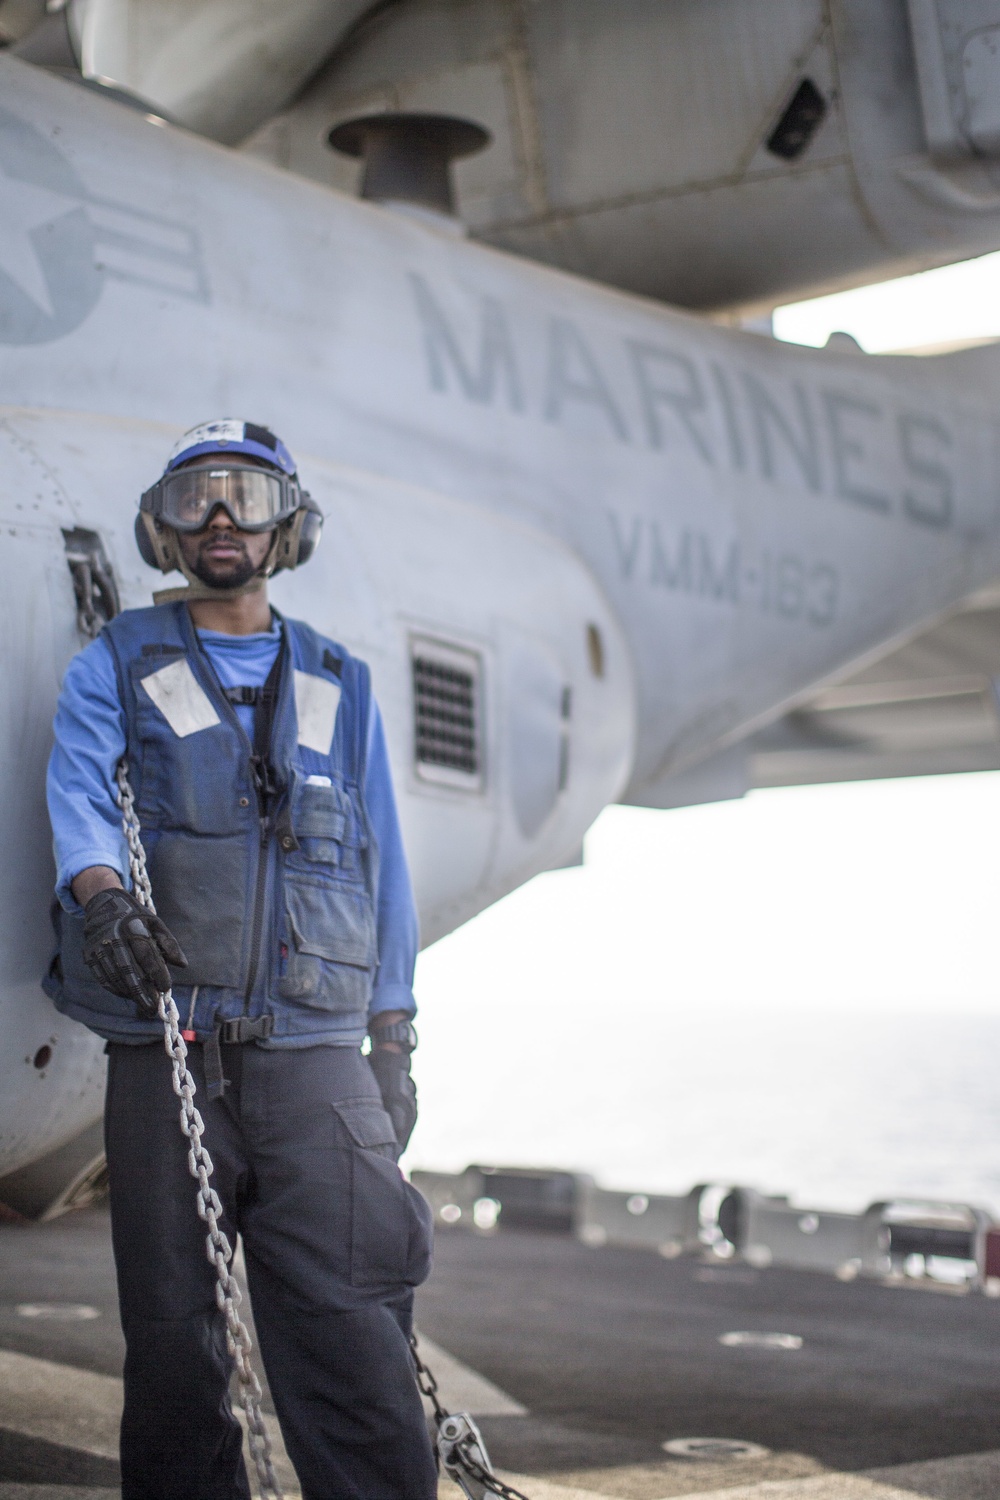 Flight Operations aboard the USS Boxer